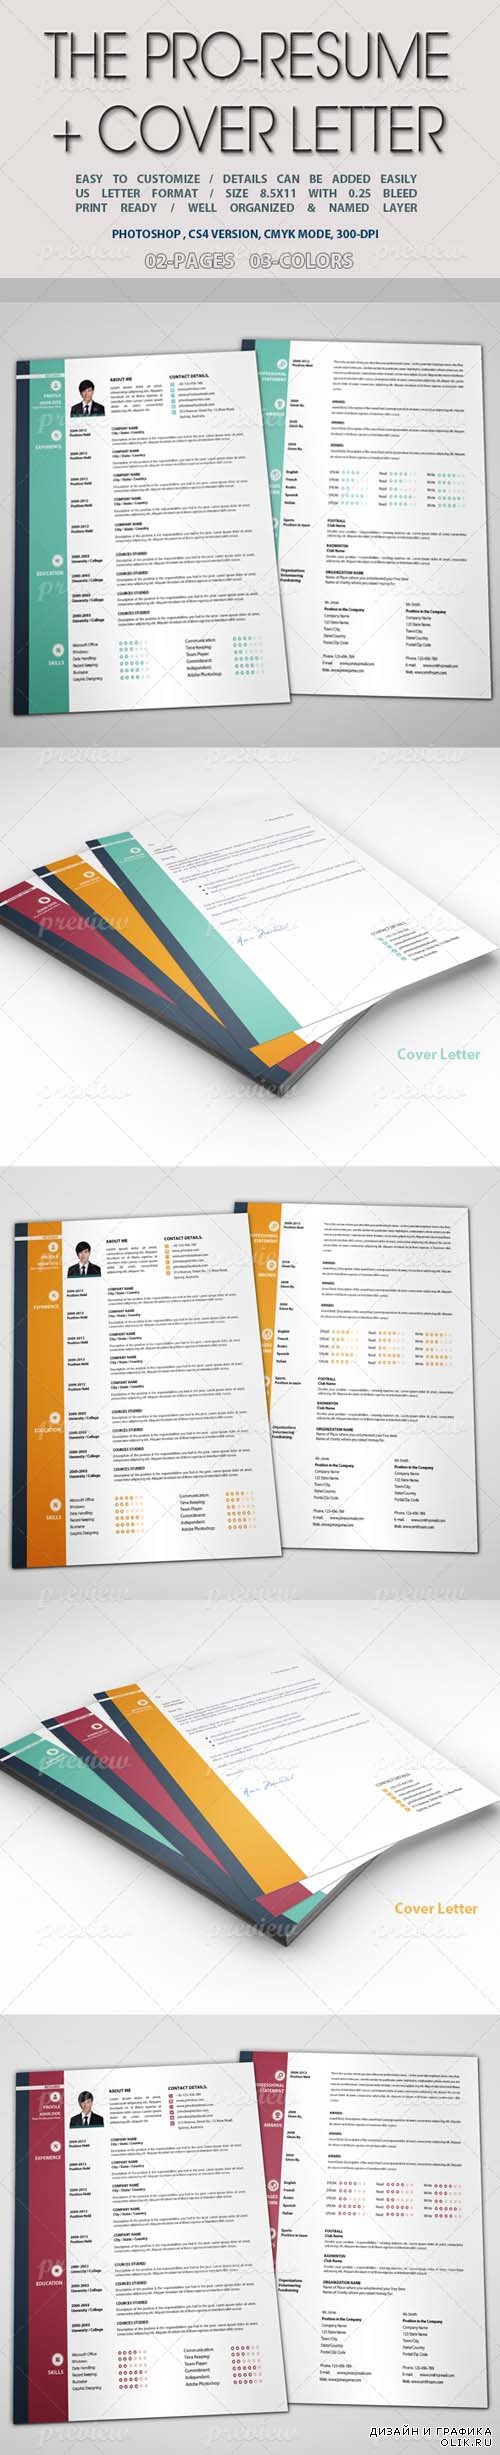 PSD - The Pro-Resume plus Cover Letter